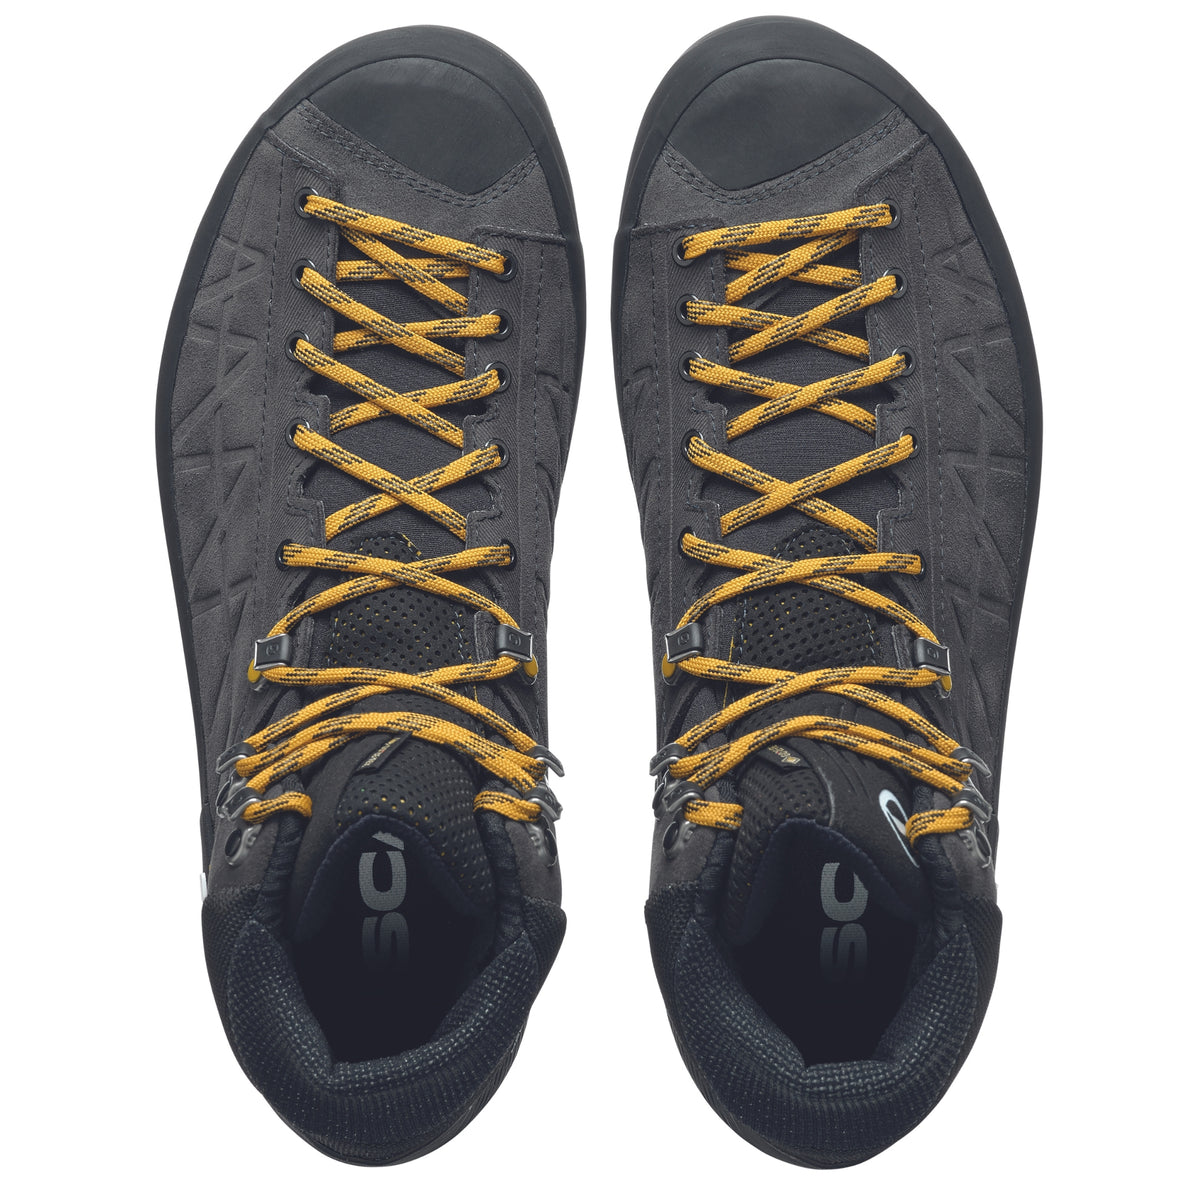 Scarpa Zodiac Tech GTX mens boots in anthracite sulphur colour. Showing laces from above